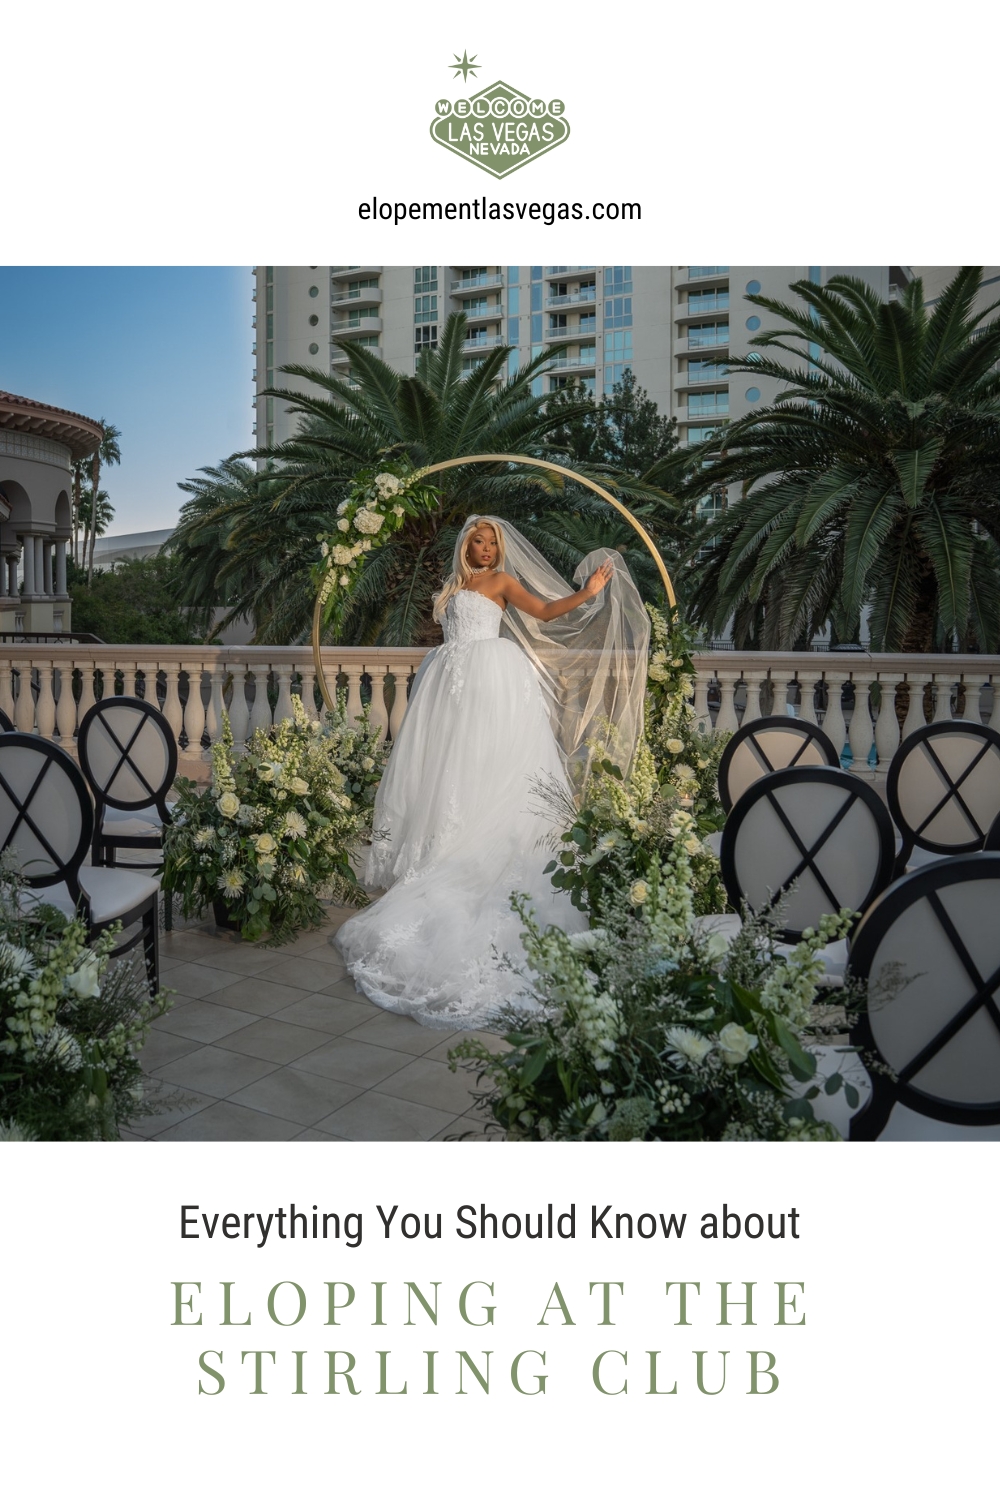 Bride posing in front of wedding arch; image overlaid with text that reads Everything You Should Know About Eloping at The Stirling Club